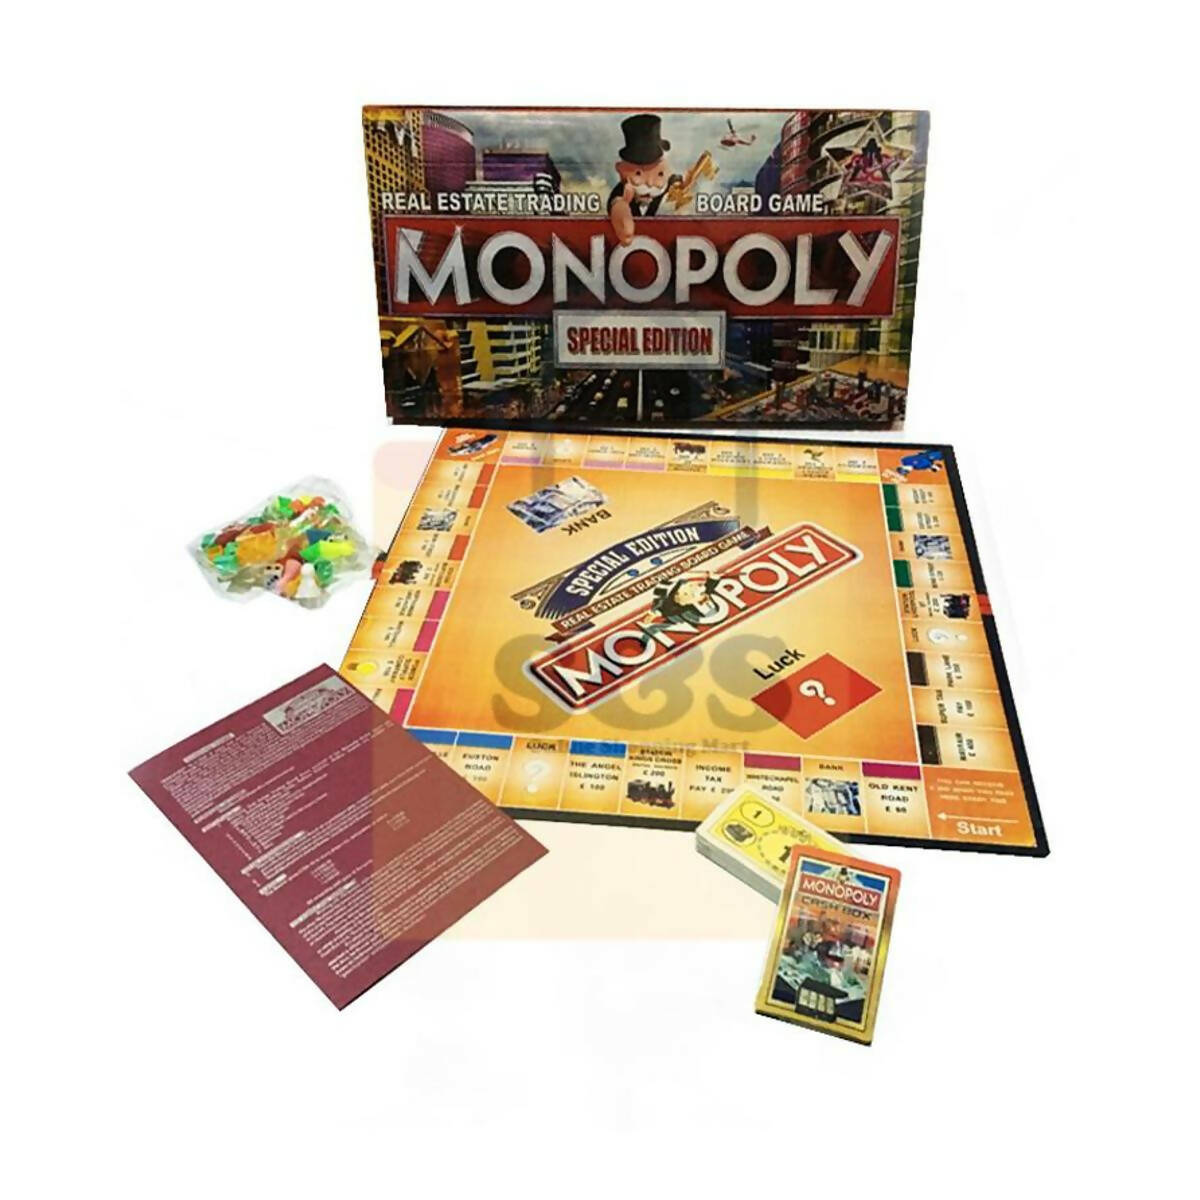 Monopoly Real Estate Trading Game Special Edition